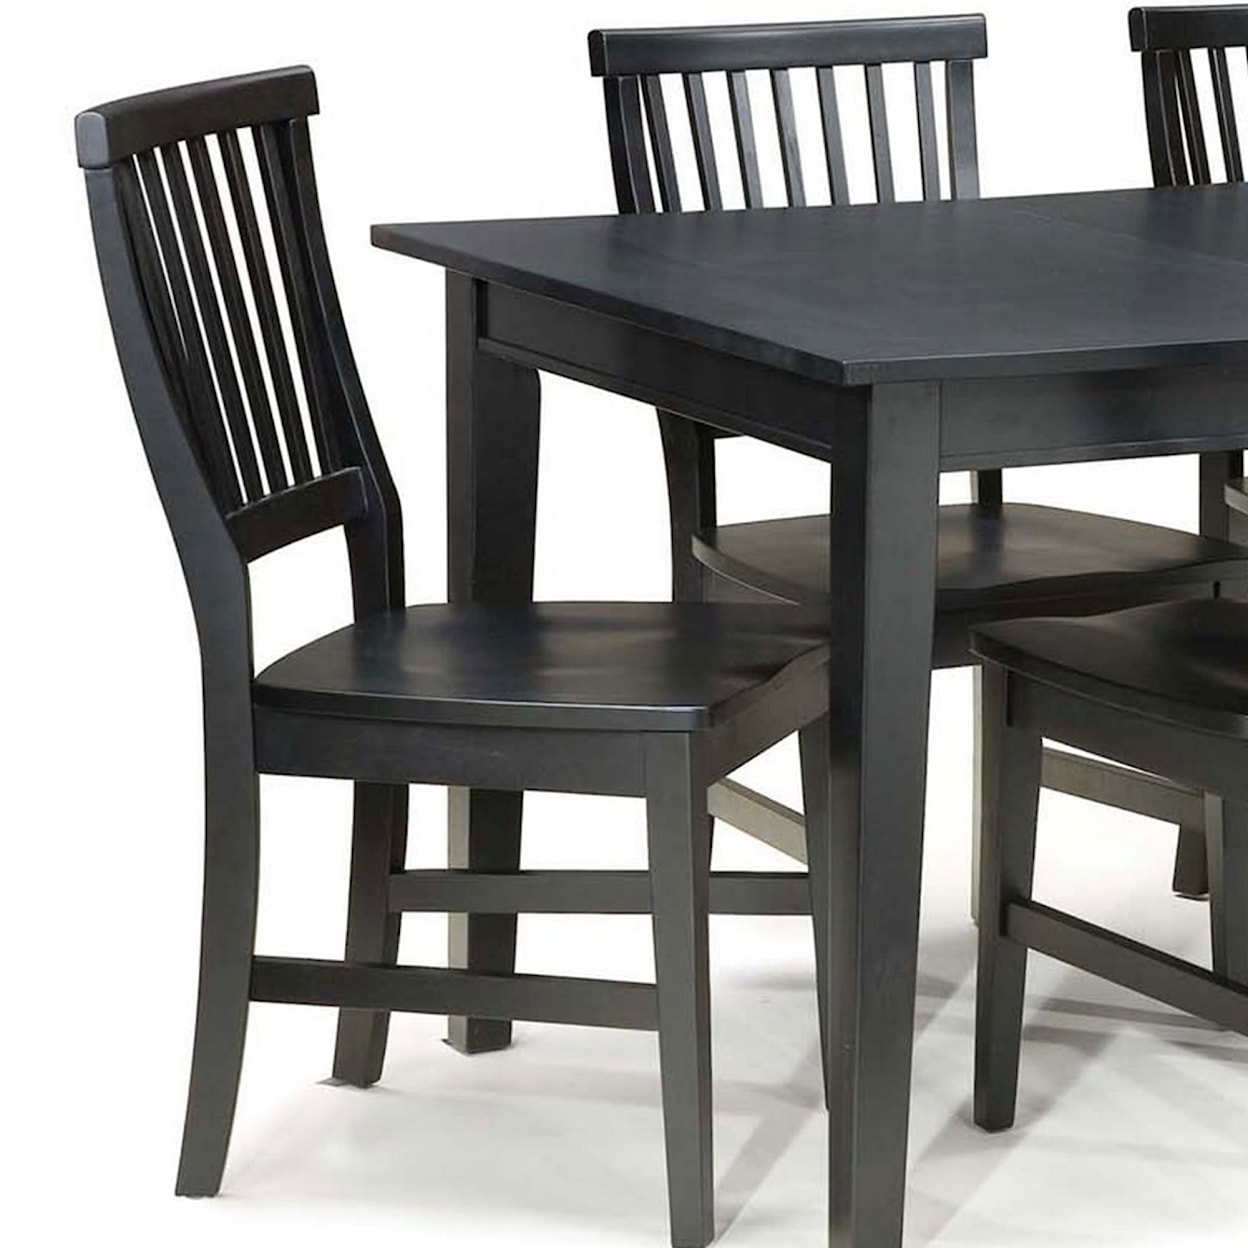 homestyles Arts and Crafts 7 Piece Dining Set